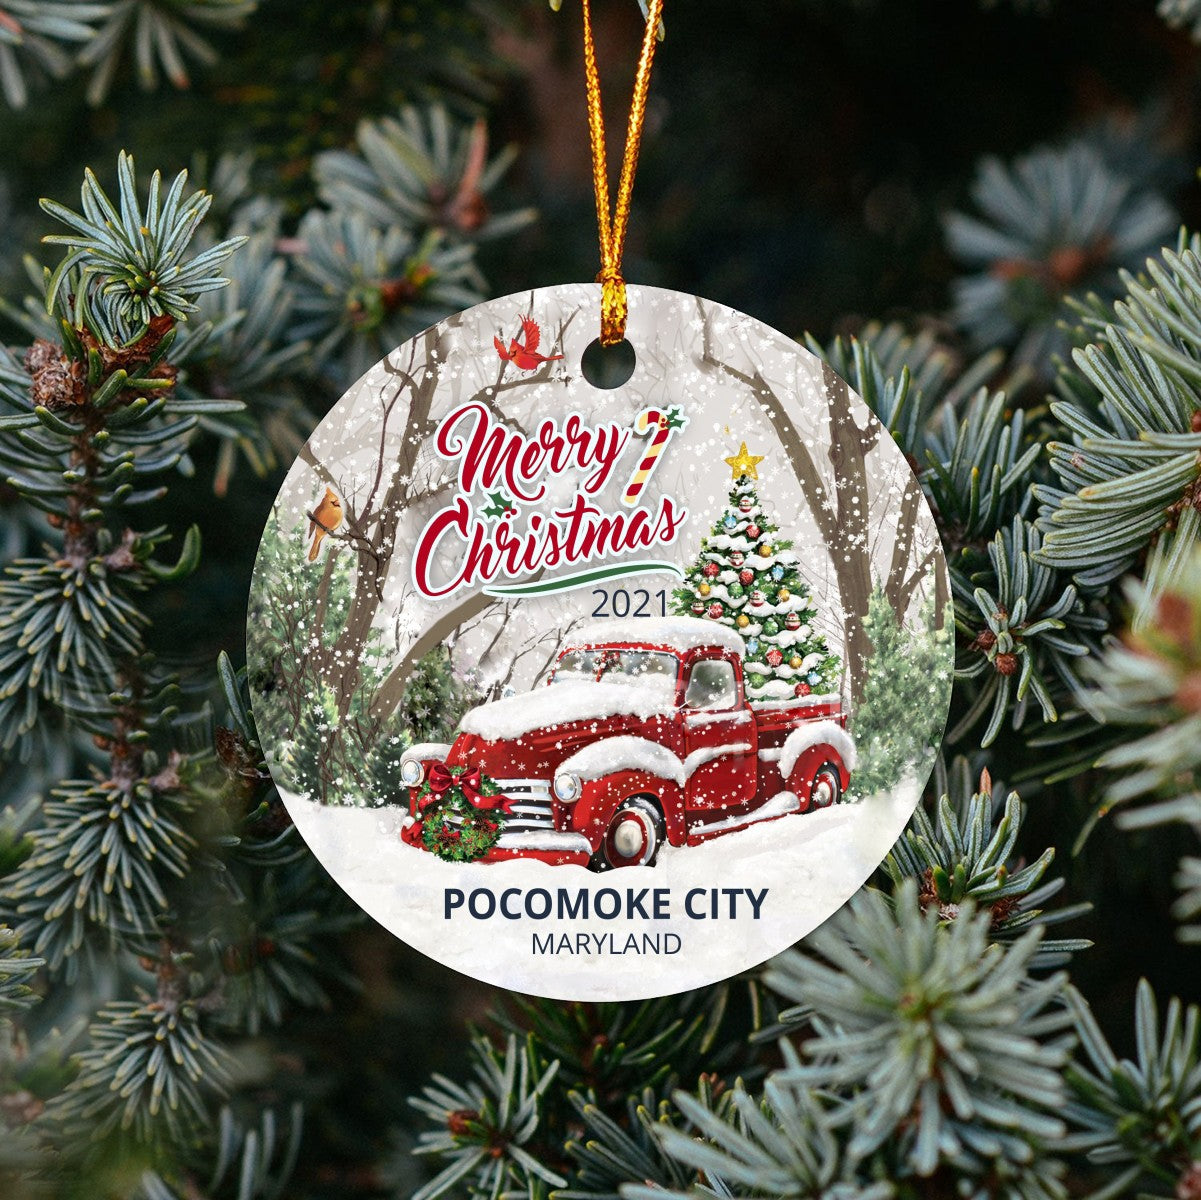 Christmas Tree Ornaments Pocomoke City - Ornament With Name City, State Pocomoke City Maryland MD Ornament - Red Truck Xmas Ornaments 3'' Plastic Gift For Family, Friend And Housewarming